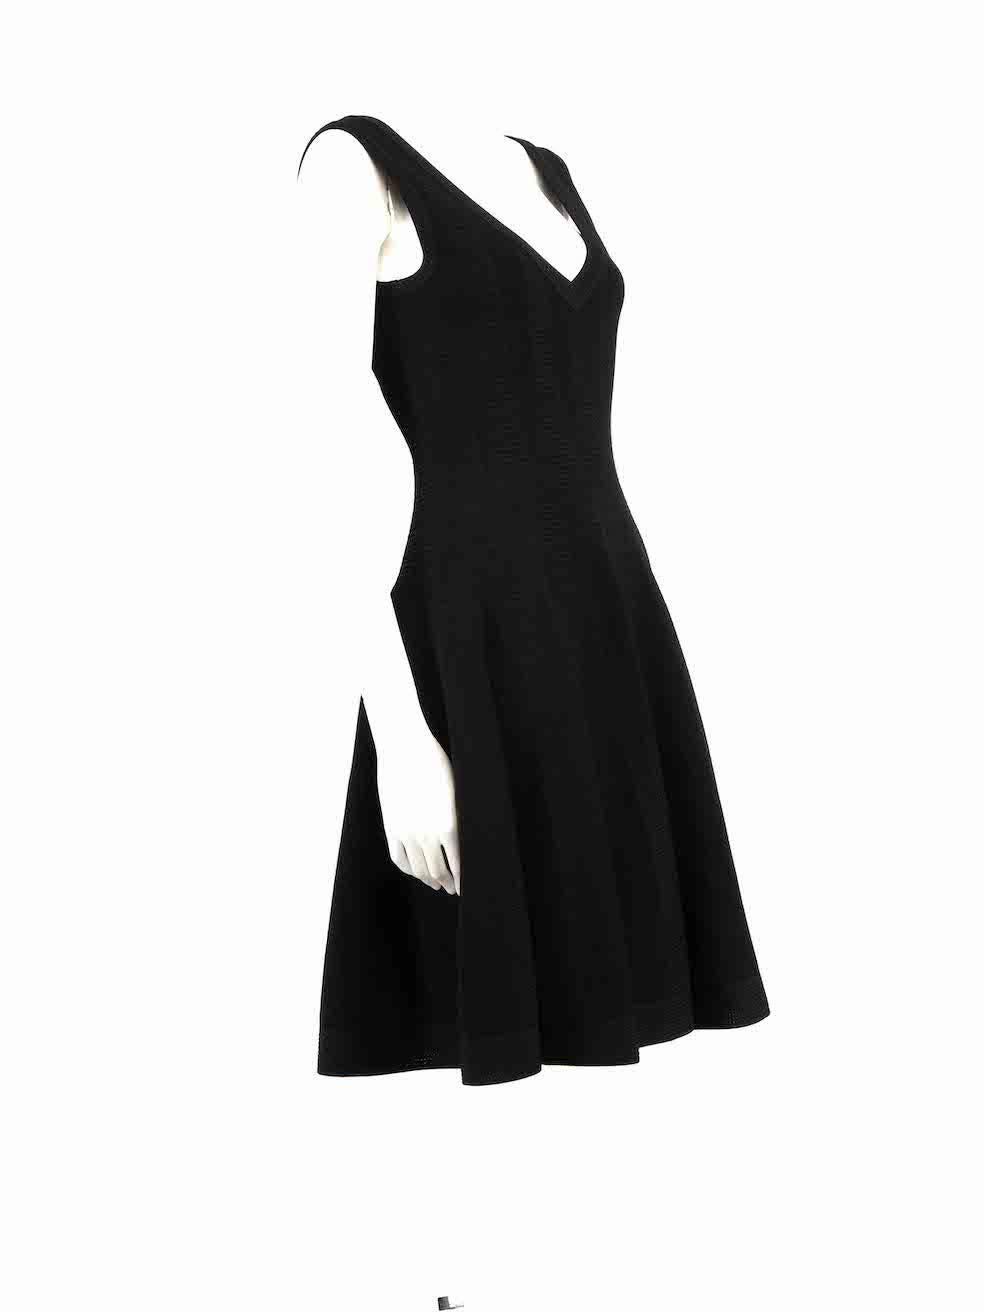 CONDITION is Very good. Hardly any visible wear to dress is evident on this used Alaïa designer resale item.
 
 
 
 Details
 
 
 Black
 
 Viscose
 
 Knee length dress
 
 Knitted and stretchy
 
 V neckline
 
 Textured
 
 Back zip closure
 
 
 
 
 
